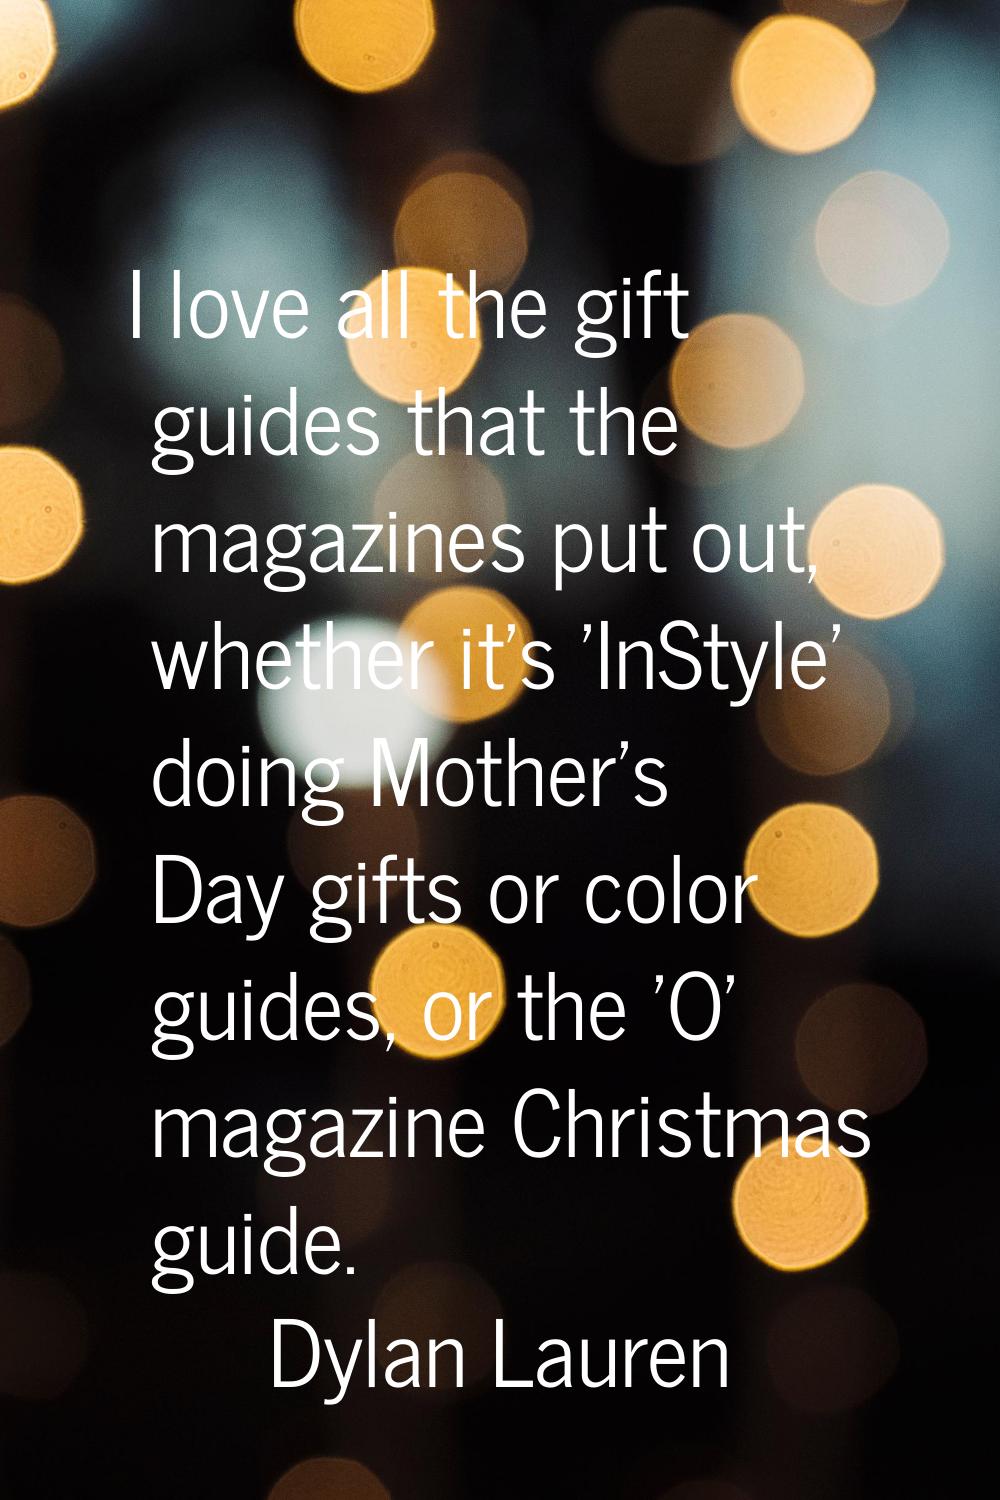 I love all the gift guides that the magazines put out, whether it's 'InStyle' doing Mother's Day gi